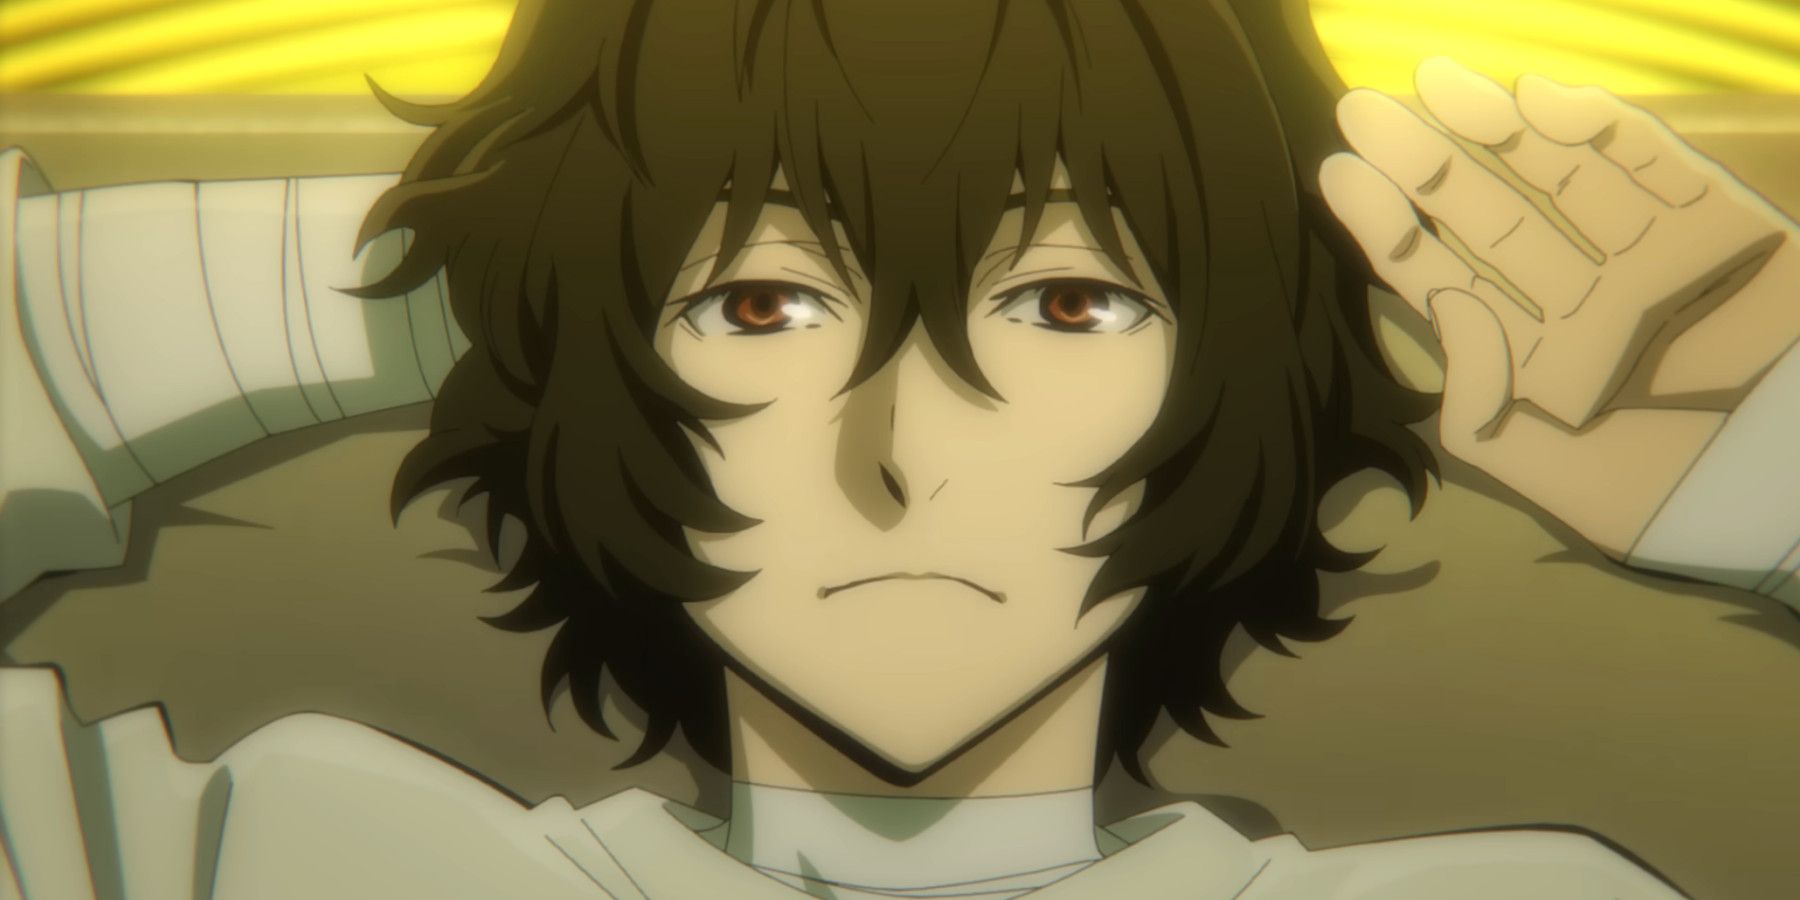 Bungo Stray Dogs Season 5 Episode 4 Release Date & Time